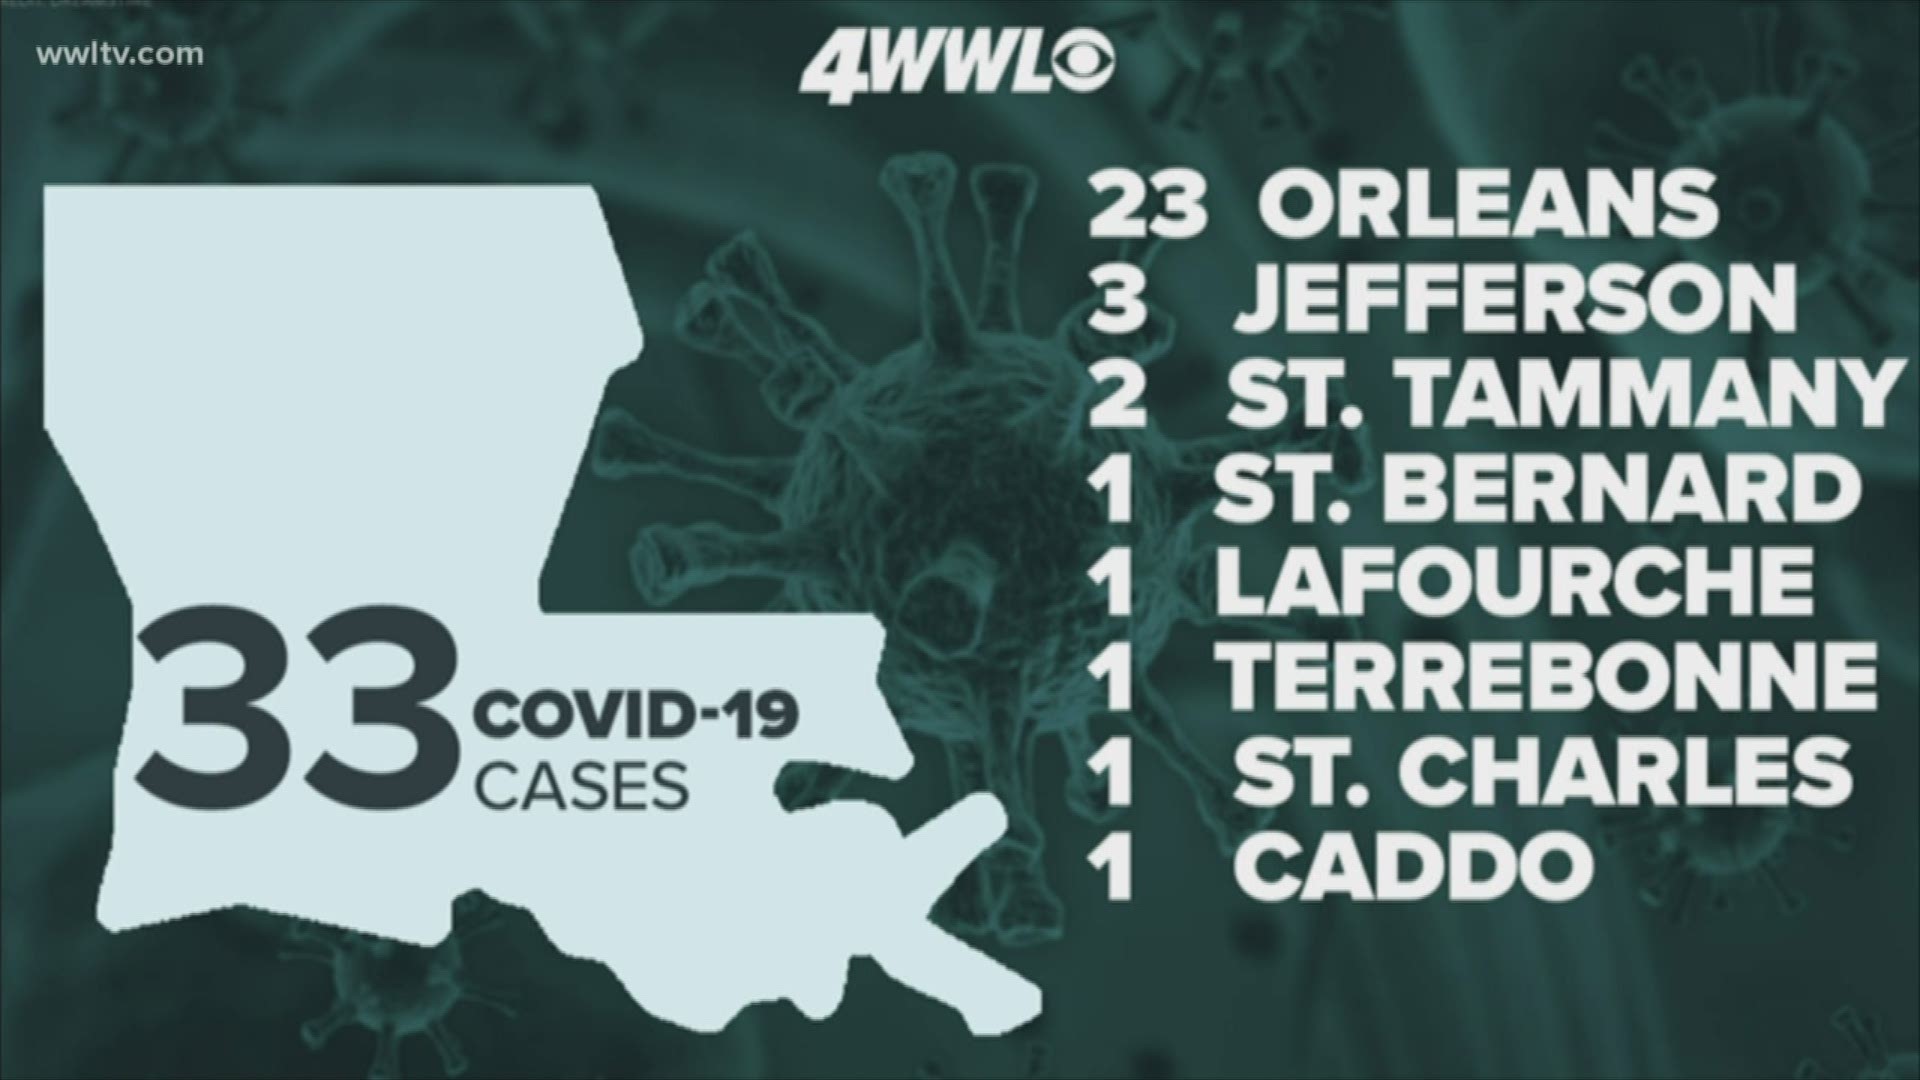 Louisiana Department of Health reports that there are 33 cases of COVID-19, the potentially deadly respiratory disease caused by the coronavirus, in the state.